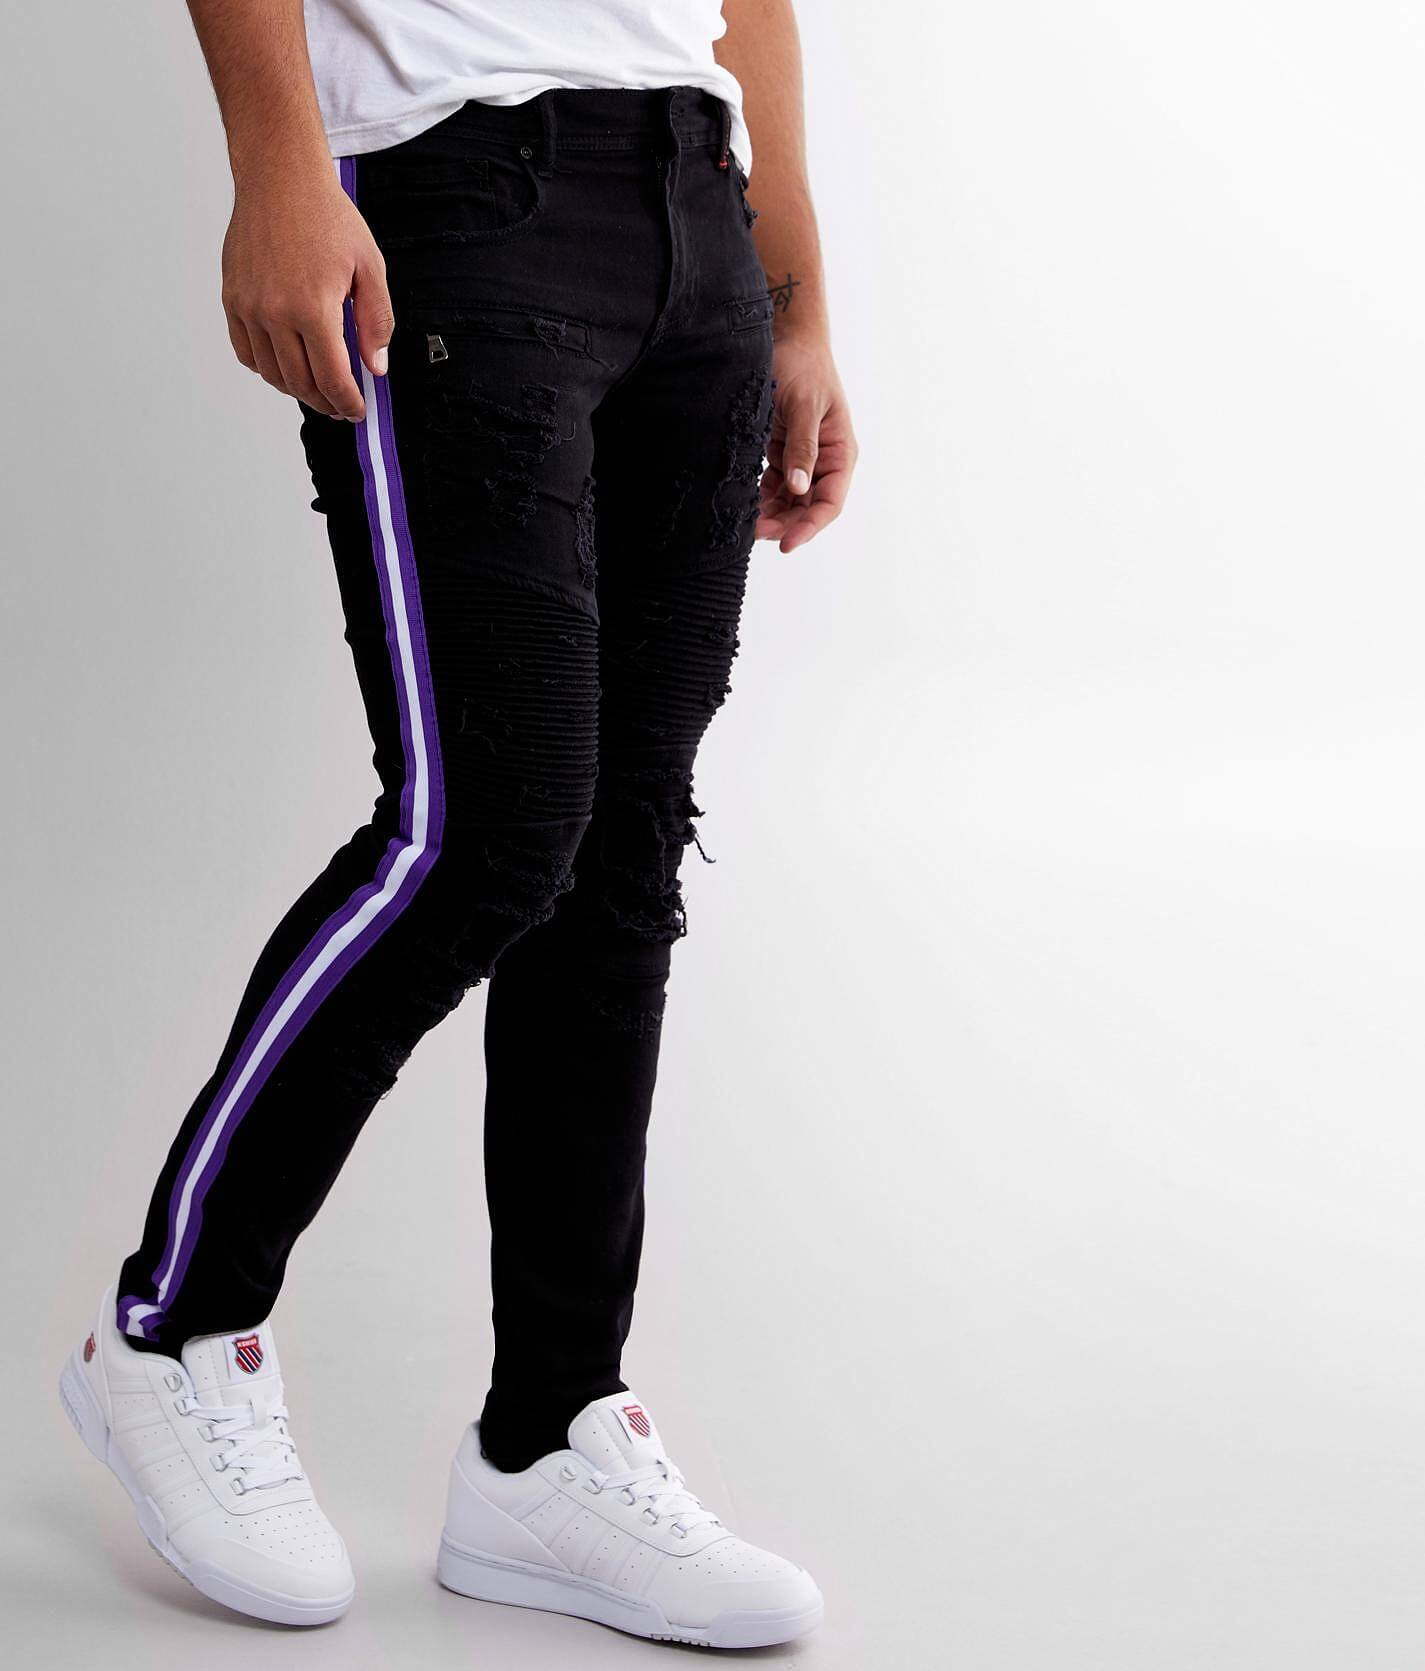 jeans with side stripe mens